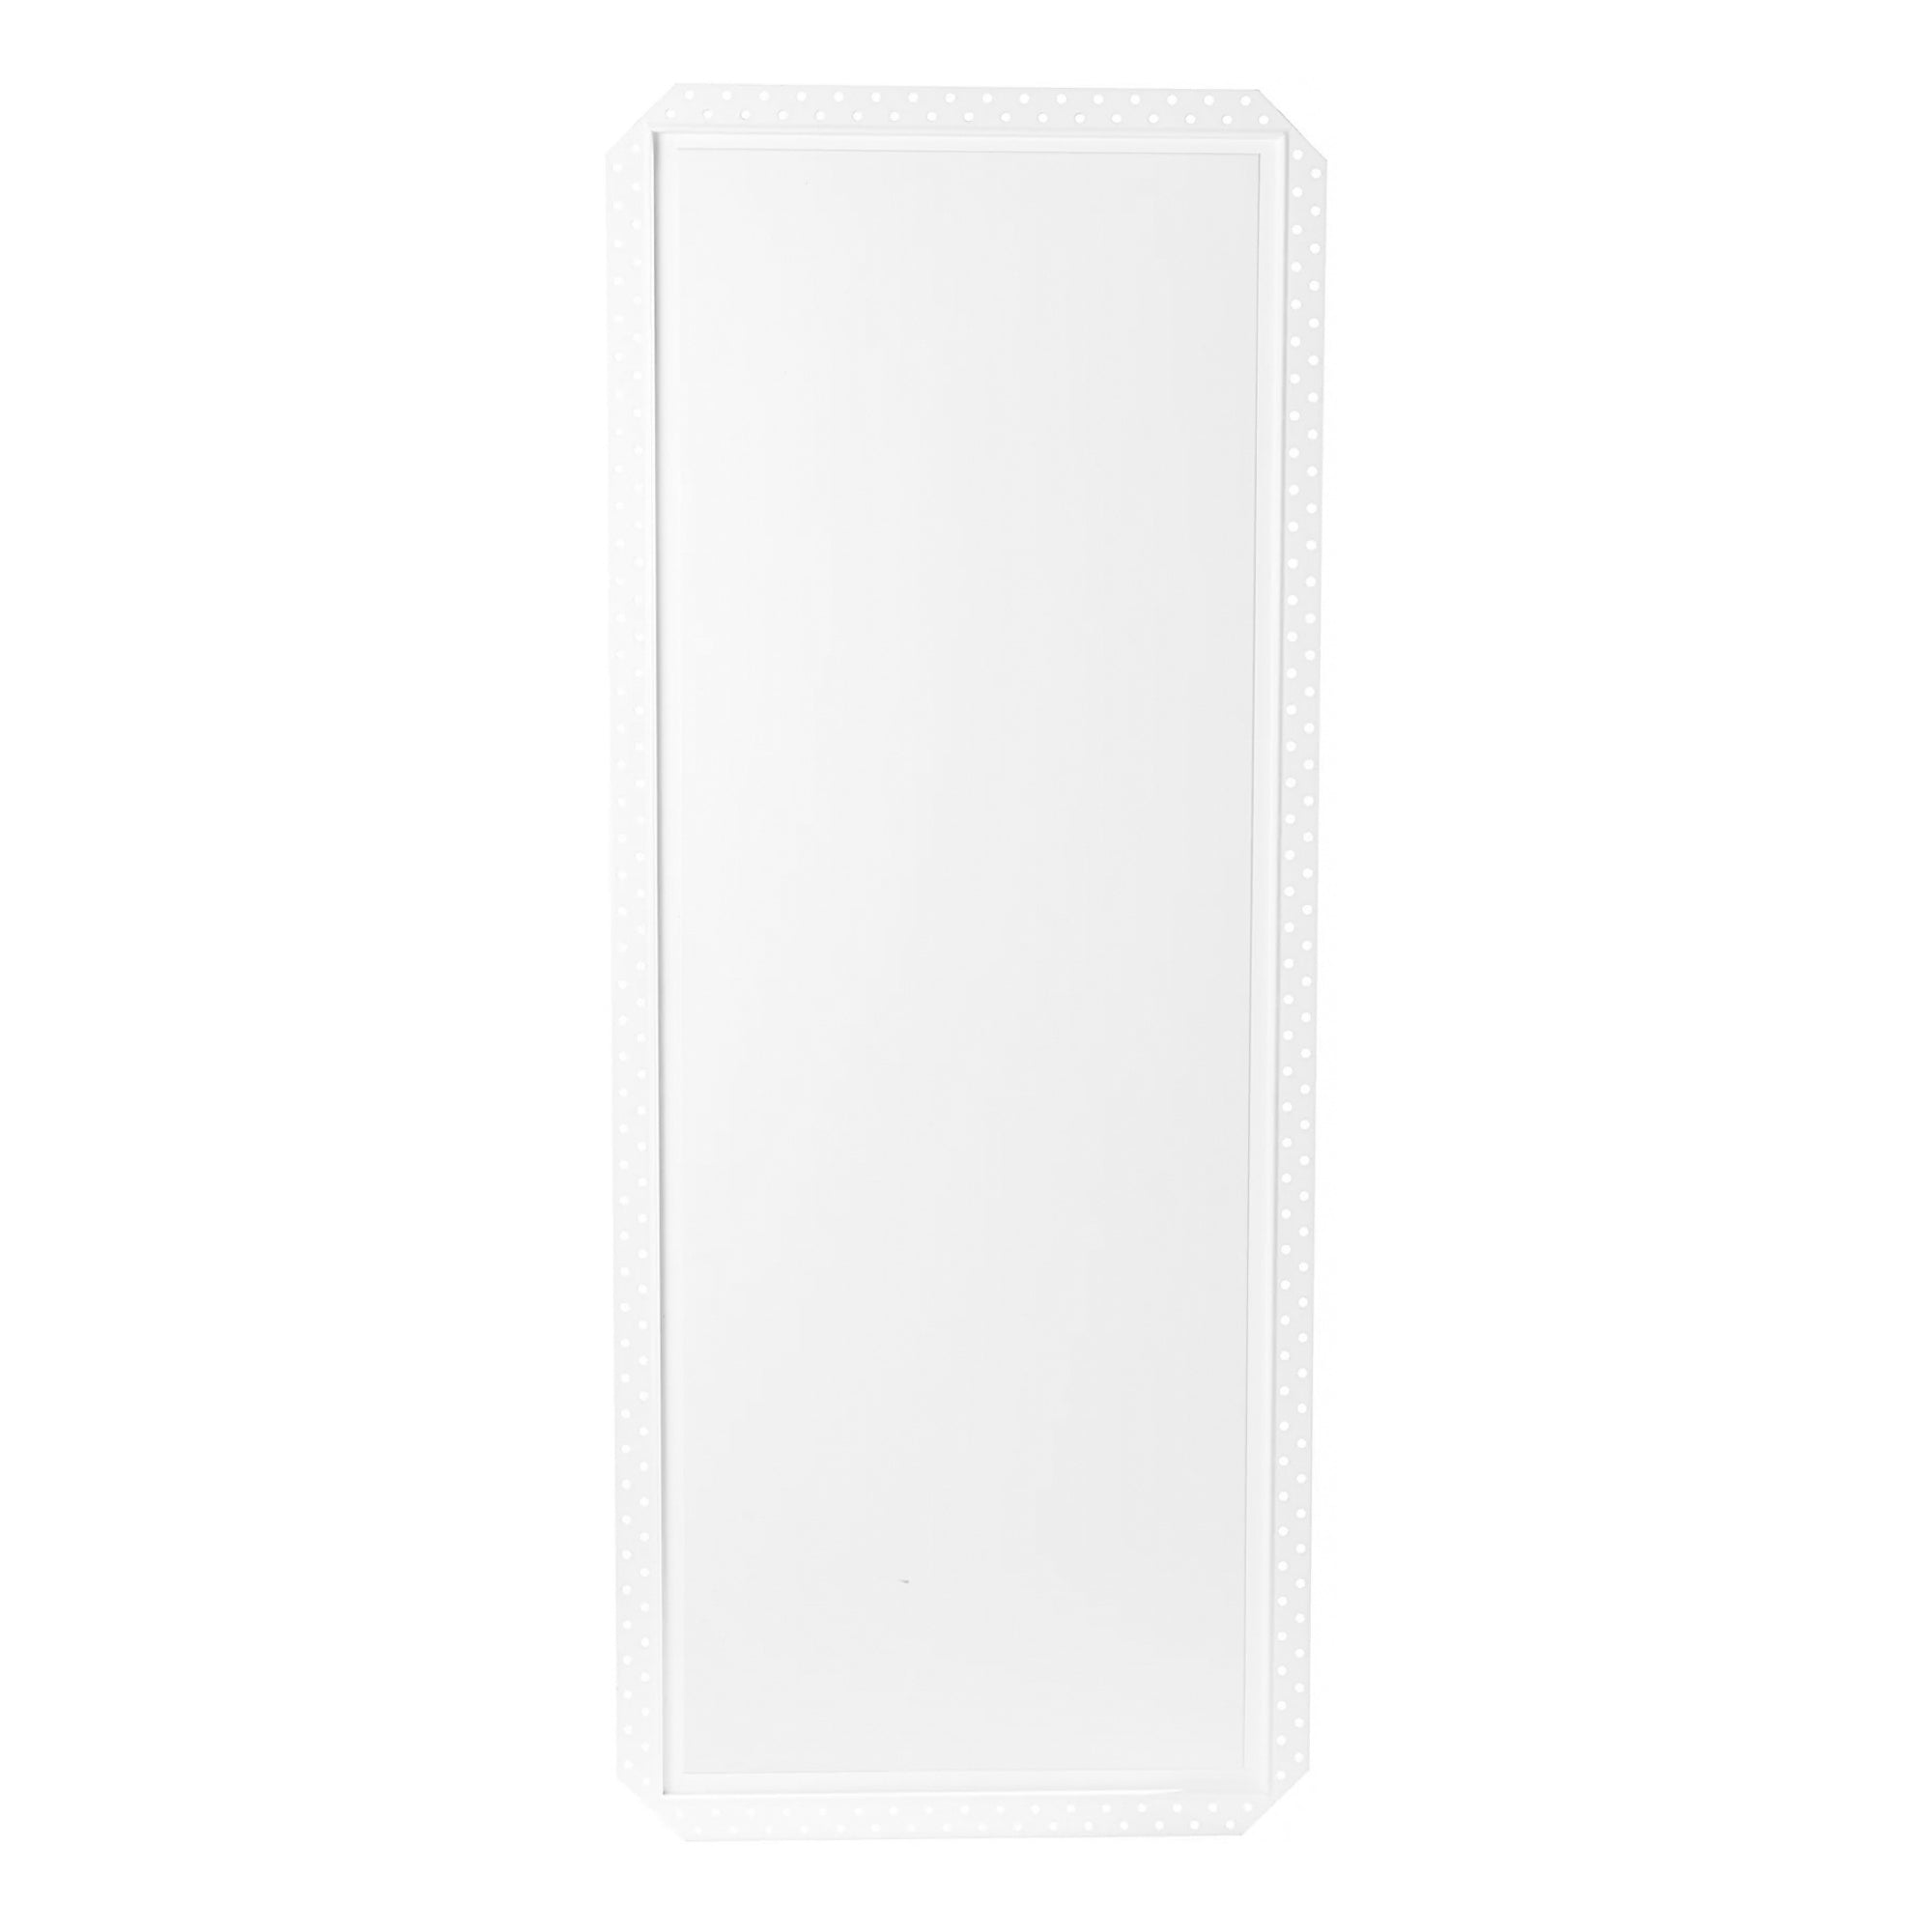 Fittes Flush Access Panel [Luxe]